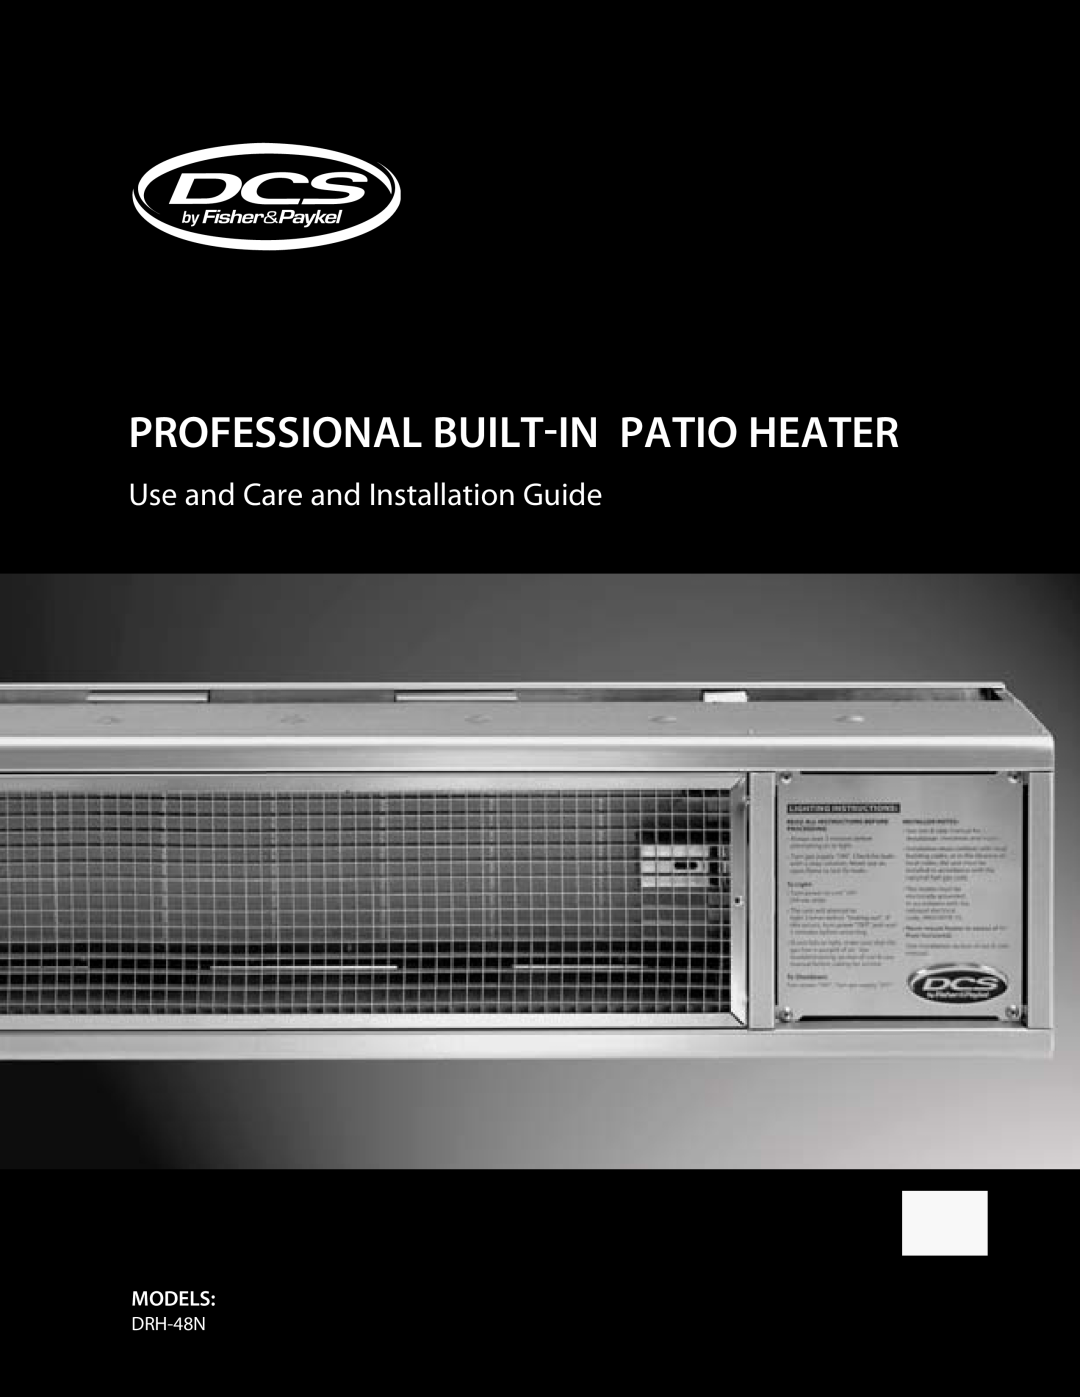 Fisher & Paykel DRH-48N manual Professional Built-Inpatio Heater, Use and Care and Installation Guide, Models 